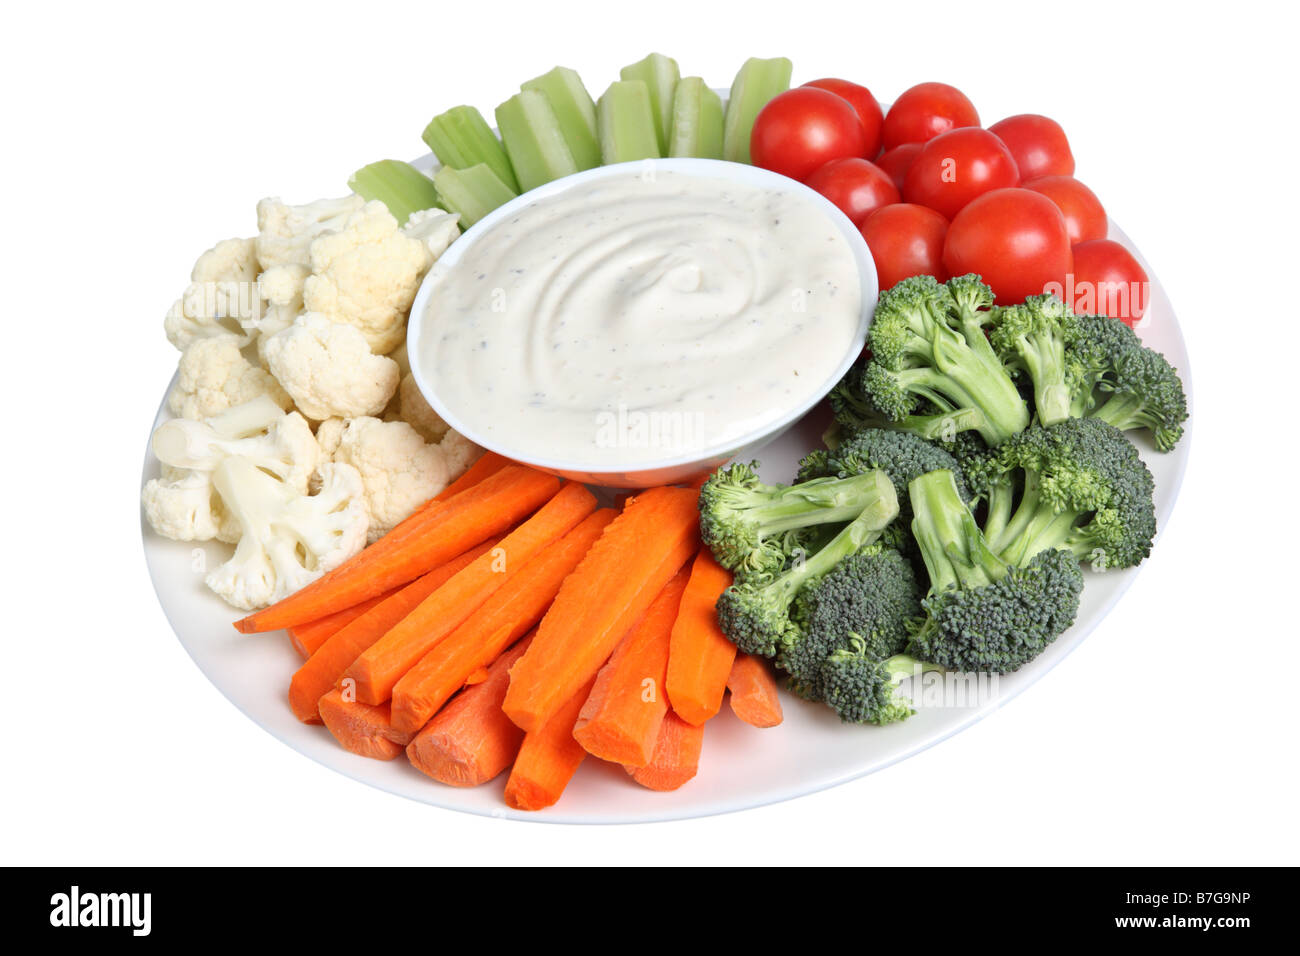 Vegetable tray with cauliflower celery tomatoes broccoli carrot sticks and ranch dip Stock Photo